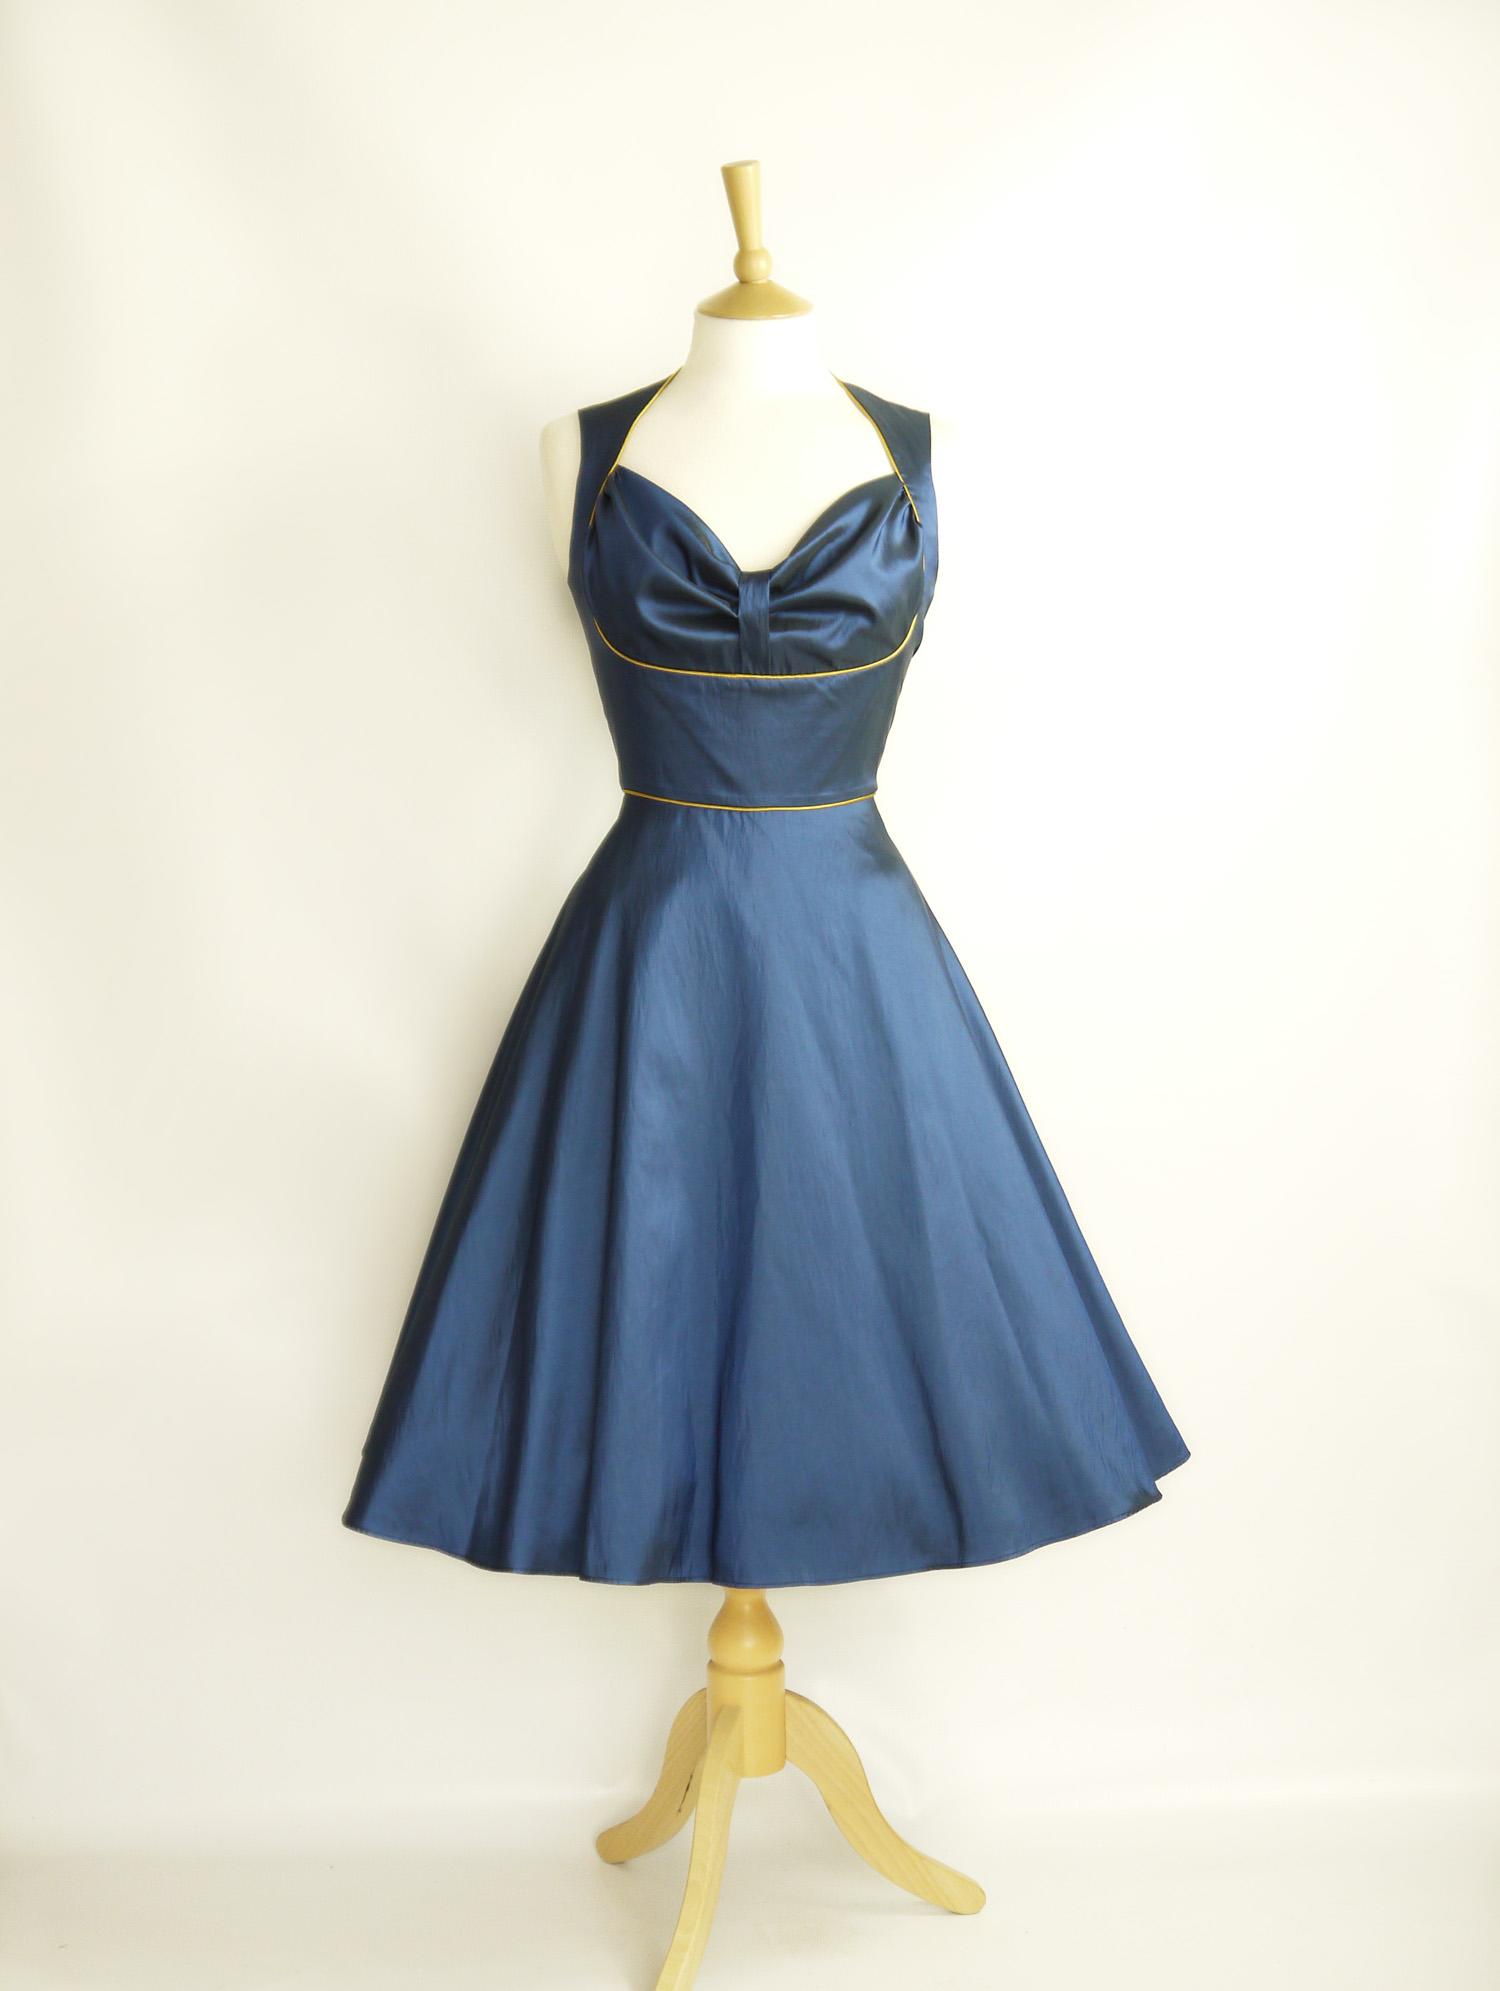 Size UK 14 - Midnight Blue Taffeta Bustier Dress with Gold Piping